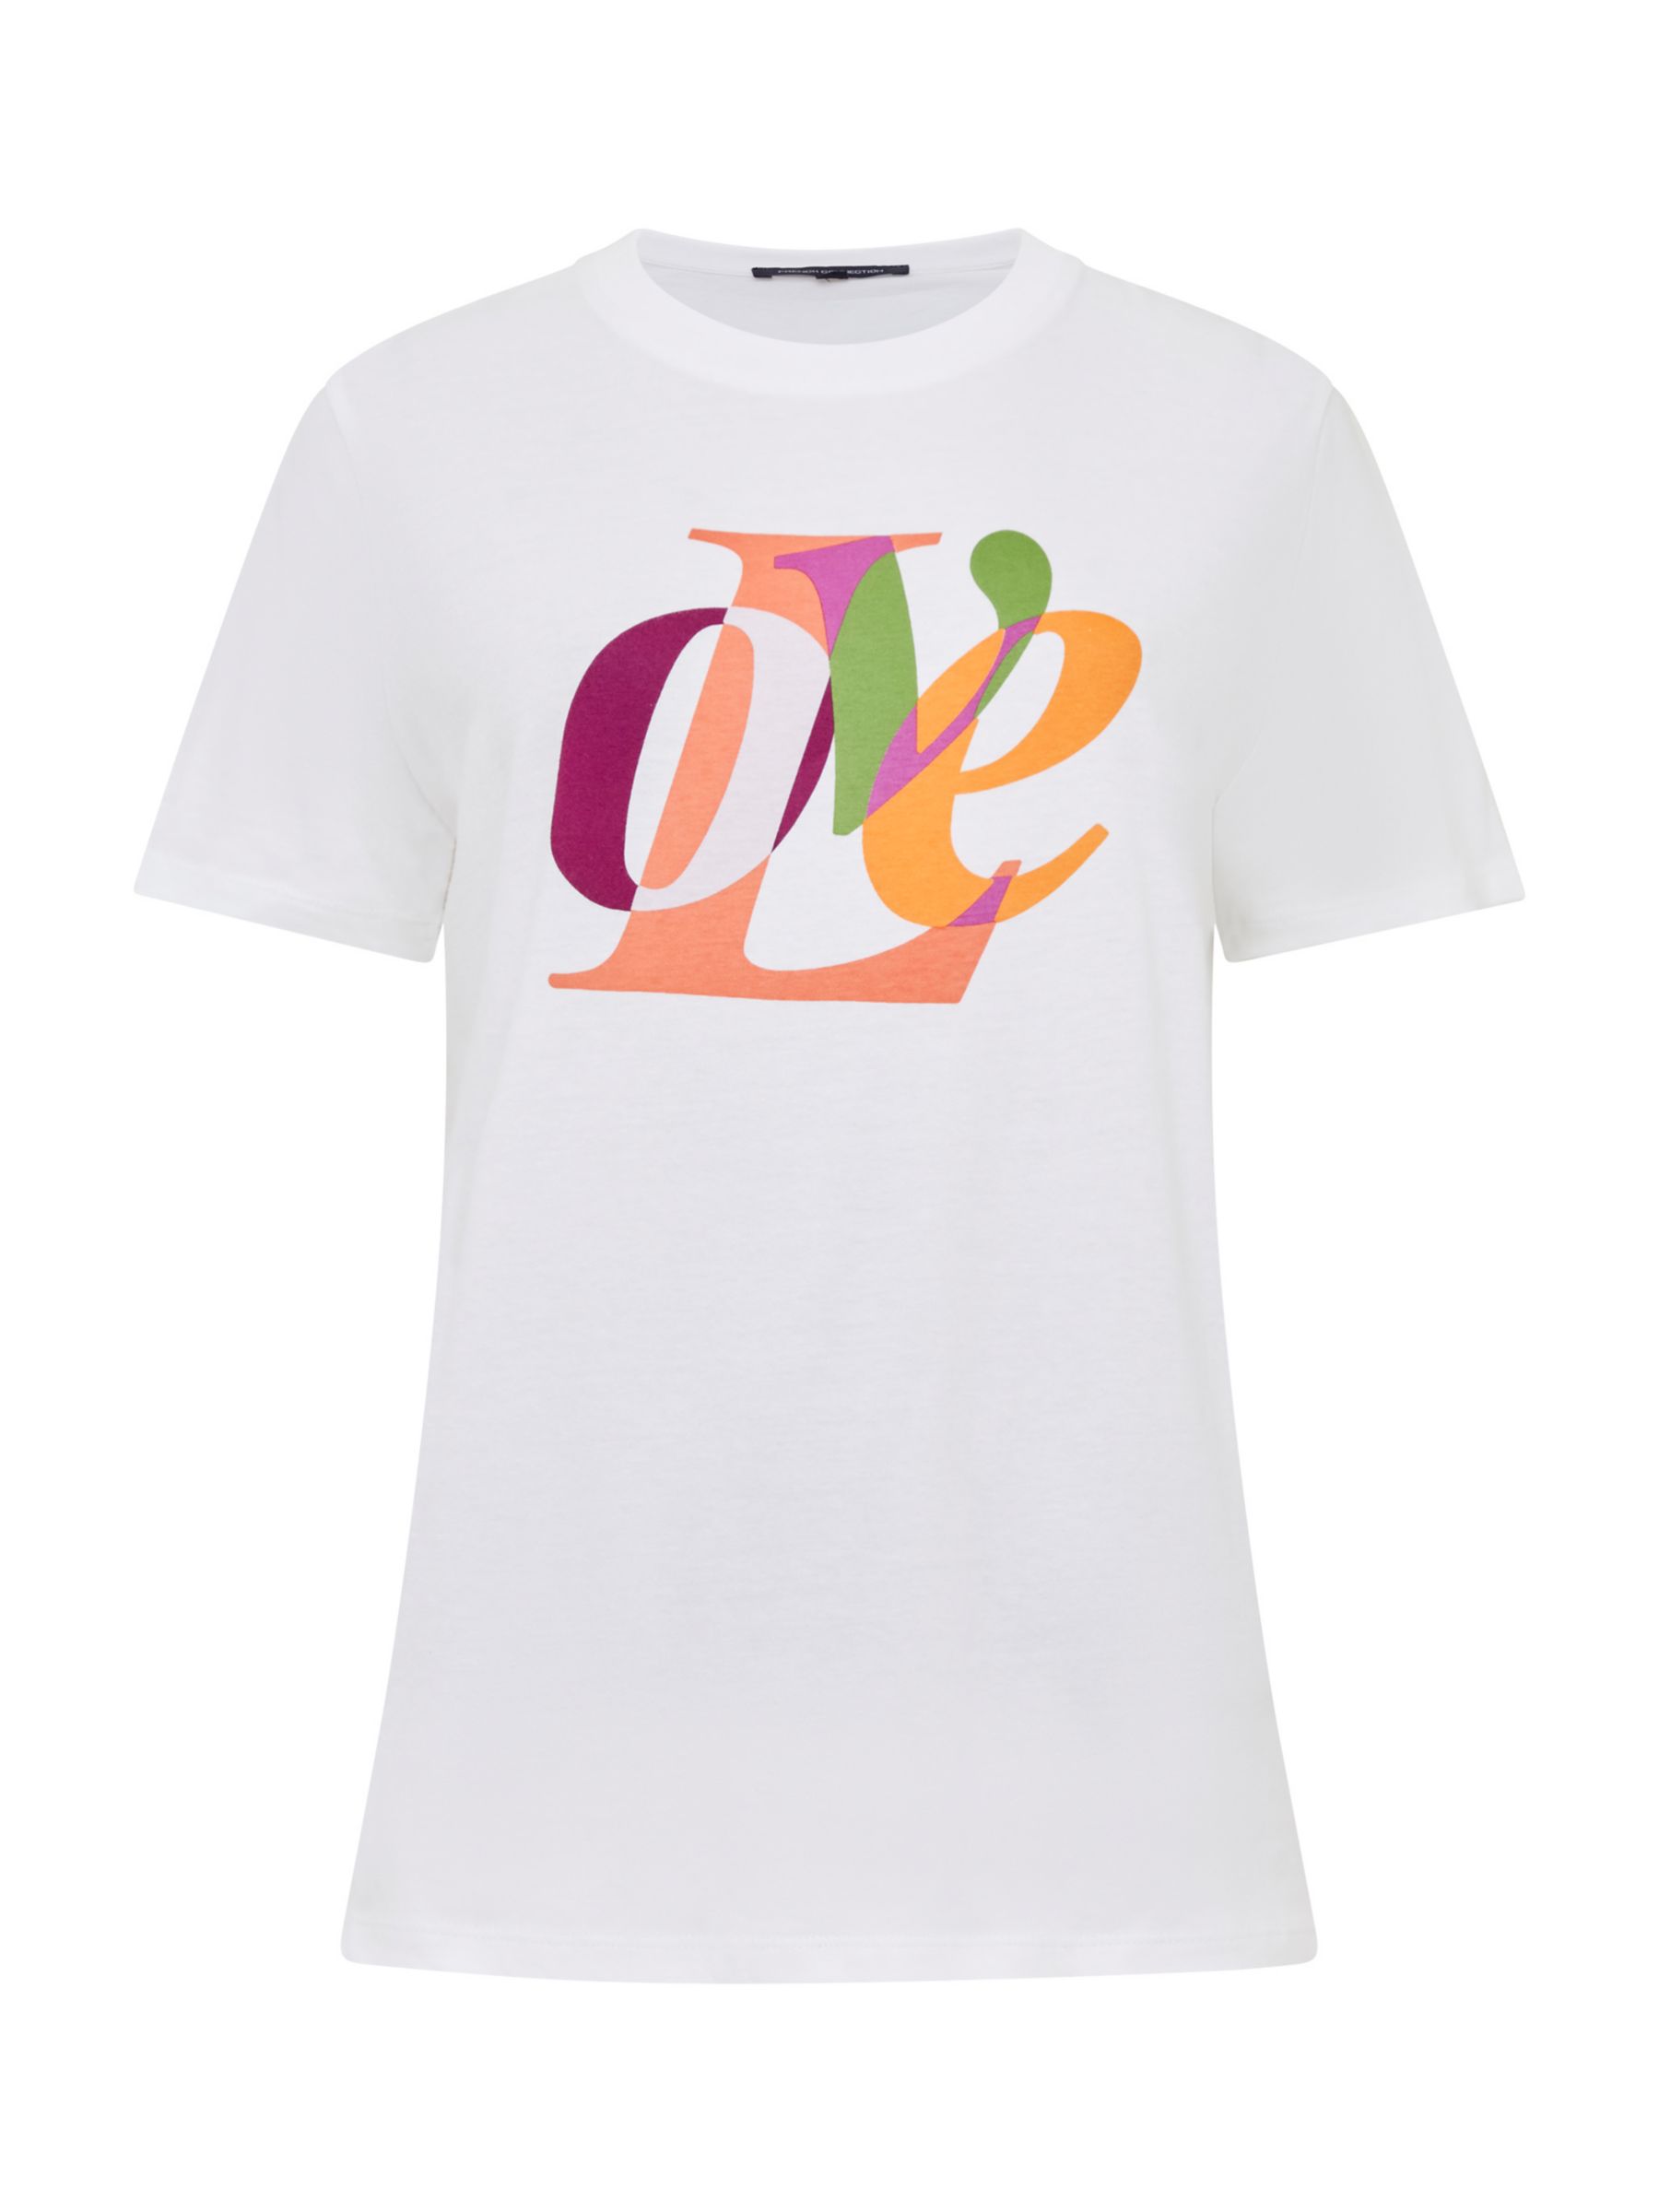 French Connection Love Graphic T-Shirt, Linen White at John Lewis ...